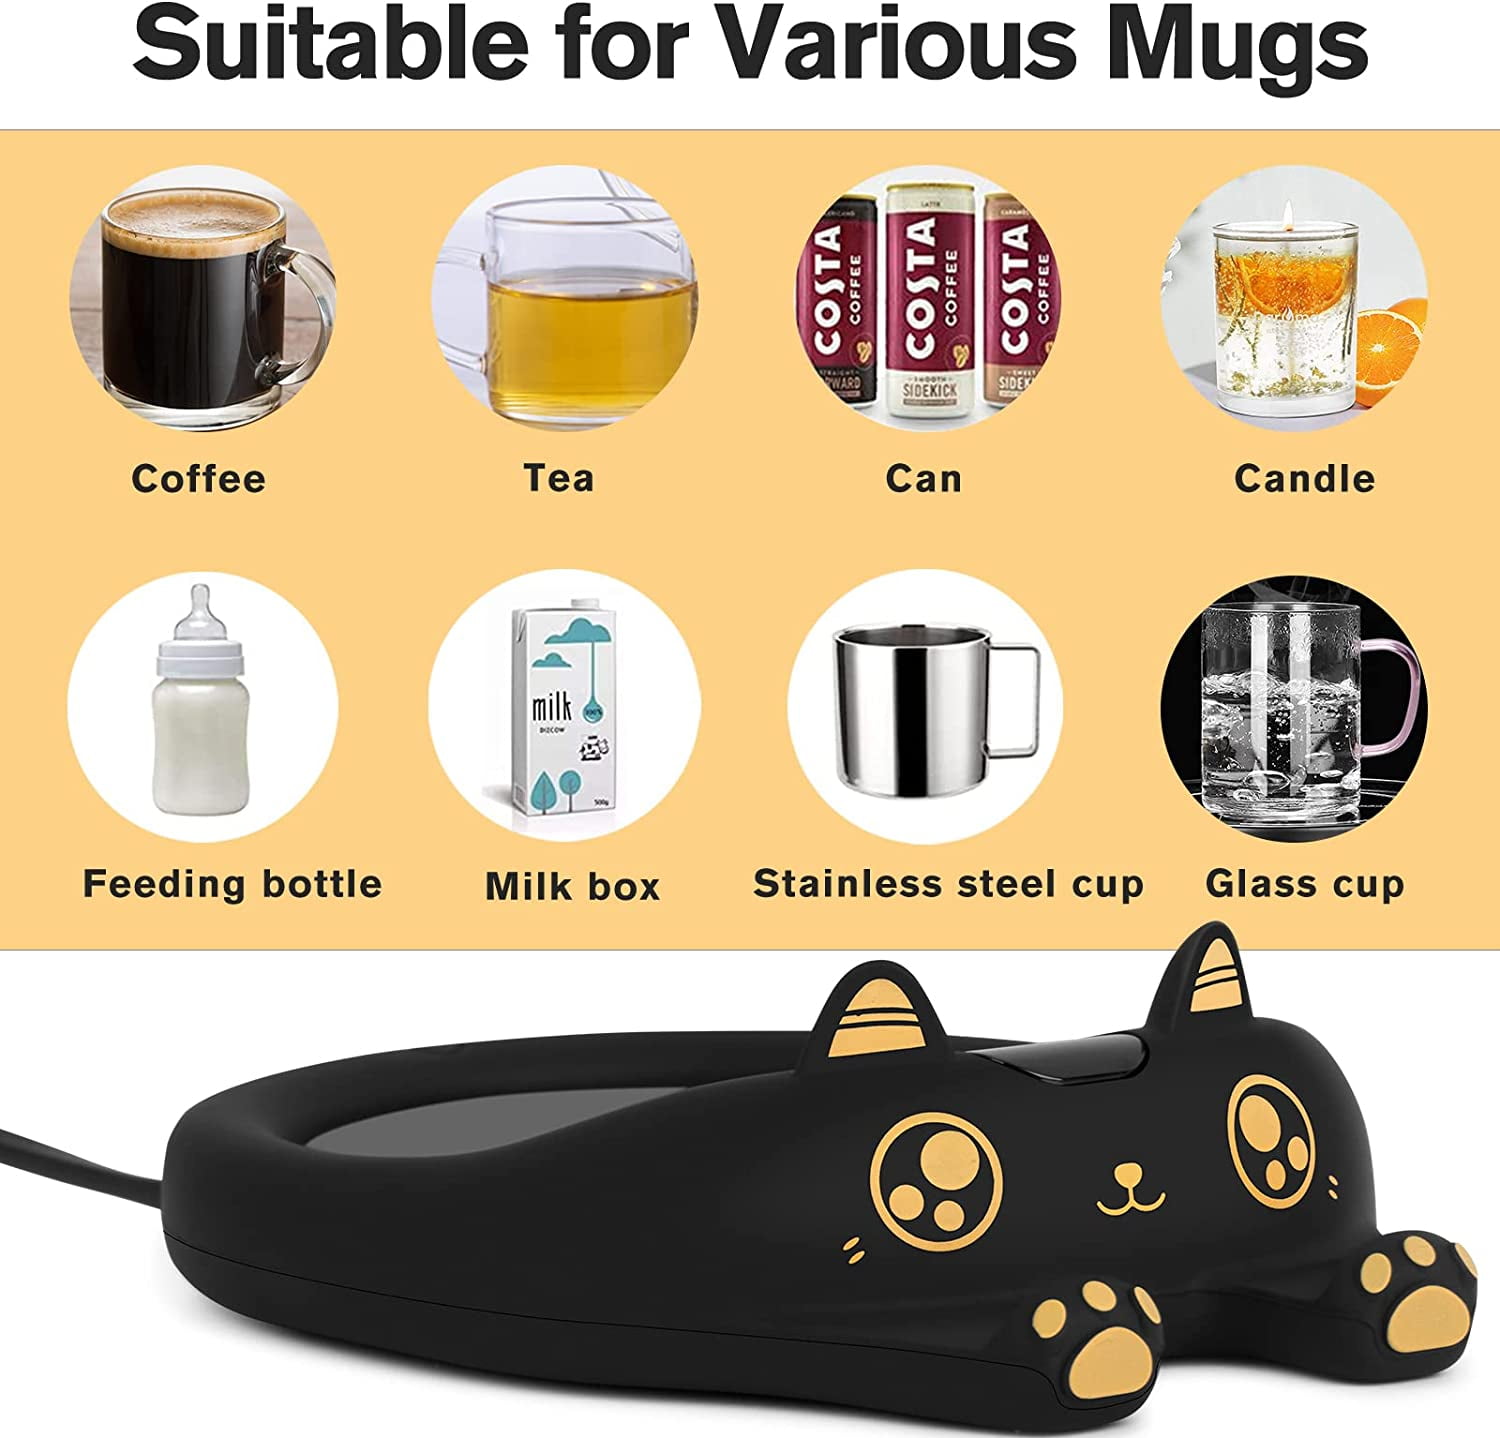  Oracer Coffeee Mug Warmer for Desk with Auto Shut Off, Coffee  Cup Candle Wax and Electric Beverage Tea Milk Warmer Heating Plate: Home &  Kitchen